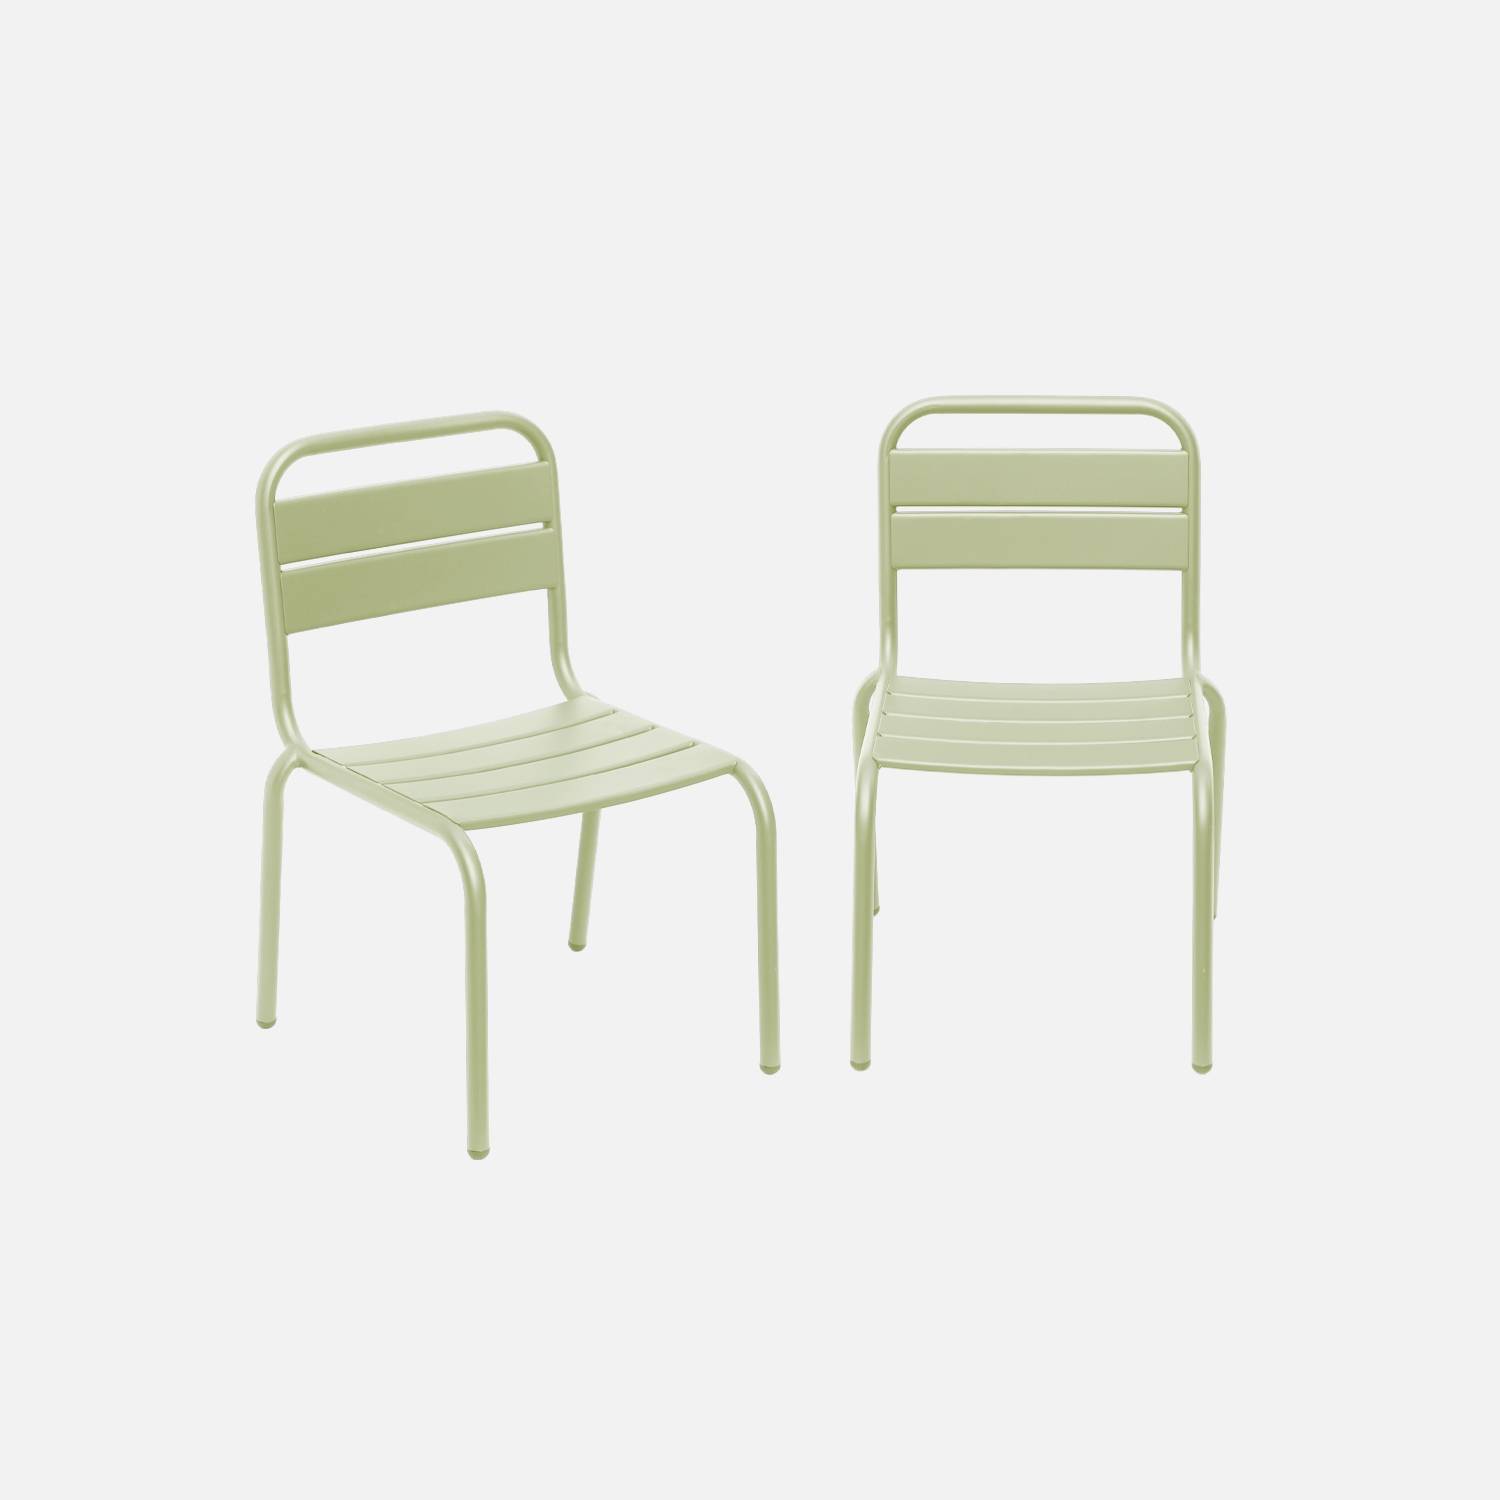 Set of 2 metal chairs for children, Vert clair